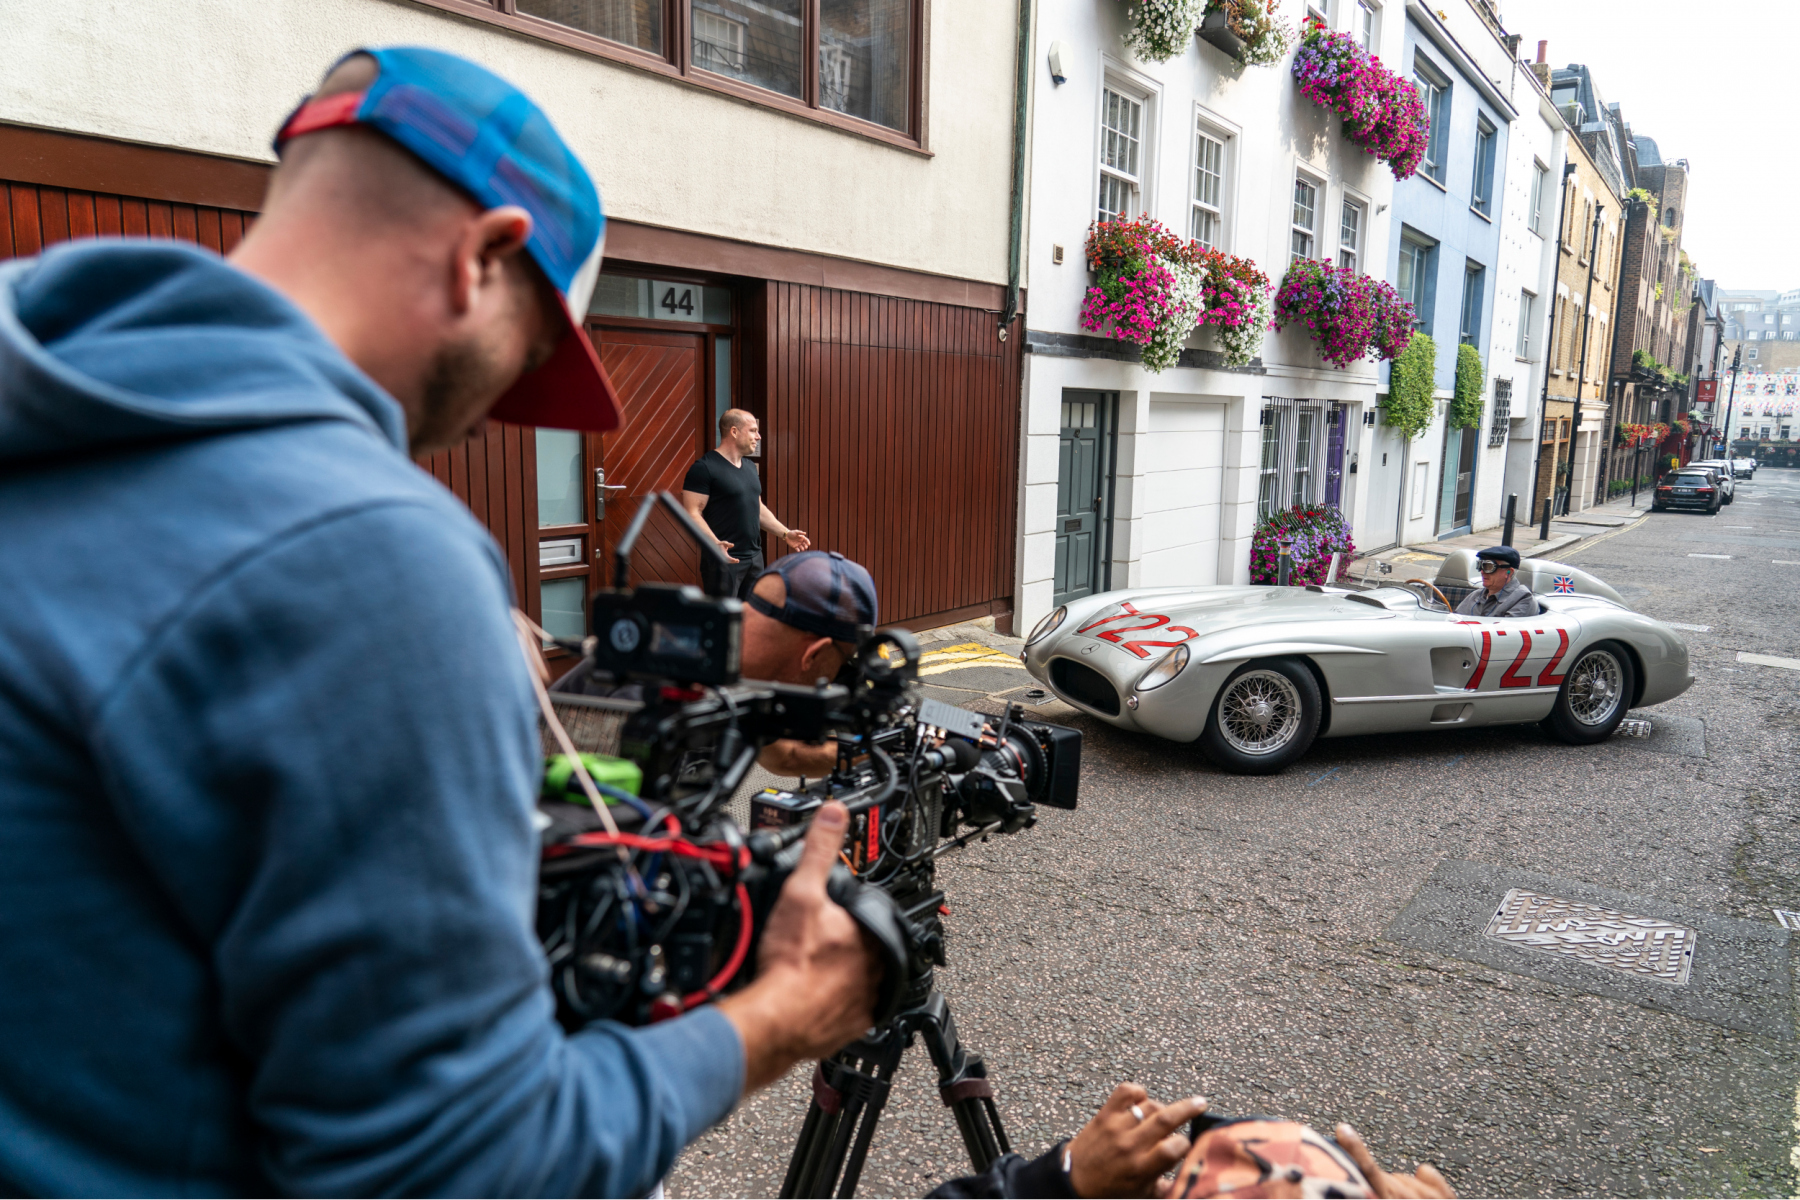 Mercedes-Benz 300 SLR “722” (W 196 S). Filming with the racing sports car for the short film “The Last Blast”, end of September 2021. With this film, Mercedes-Benz Classic honored the life of Sir Stirling Moss, who died on 12 April 2020 at the age of 90. The unique drive through London ended in Mayfair at the Moss’ family home. At the door: Elliot Moss, Stirling’s son. The racing driver and his co-driver Denis Jenkinson won the 1955 Mille Miglia with this car. Driving scene.